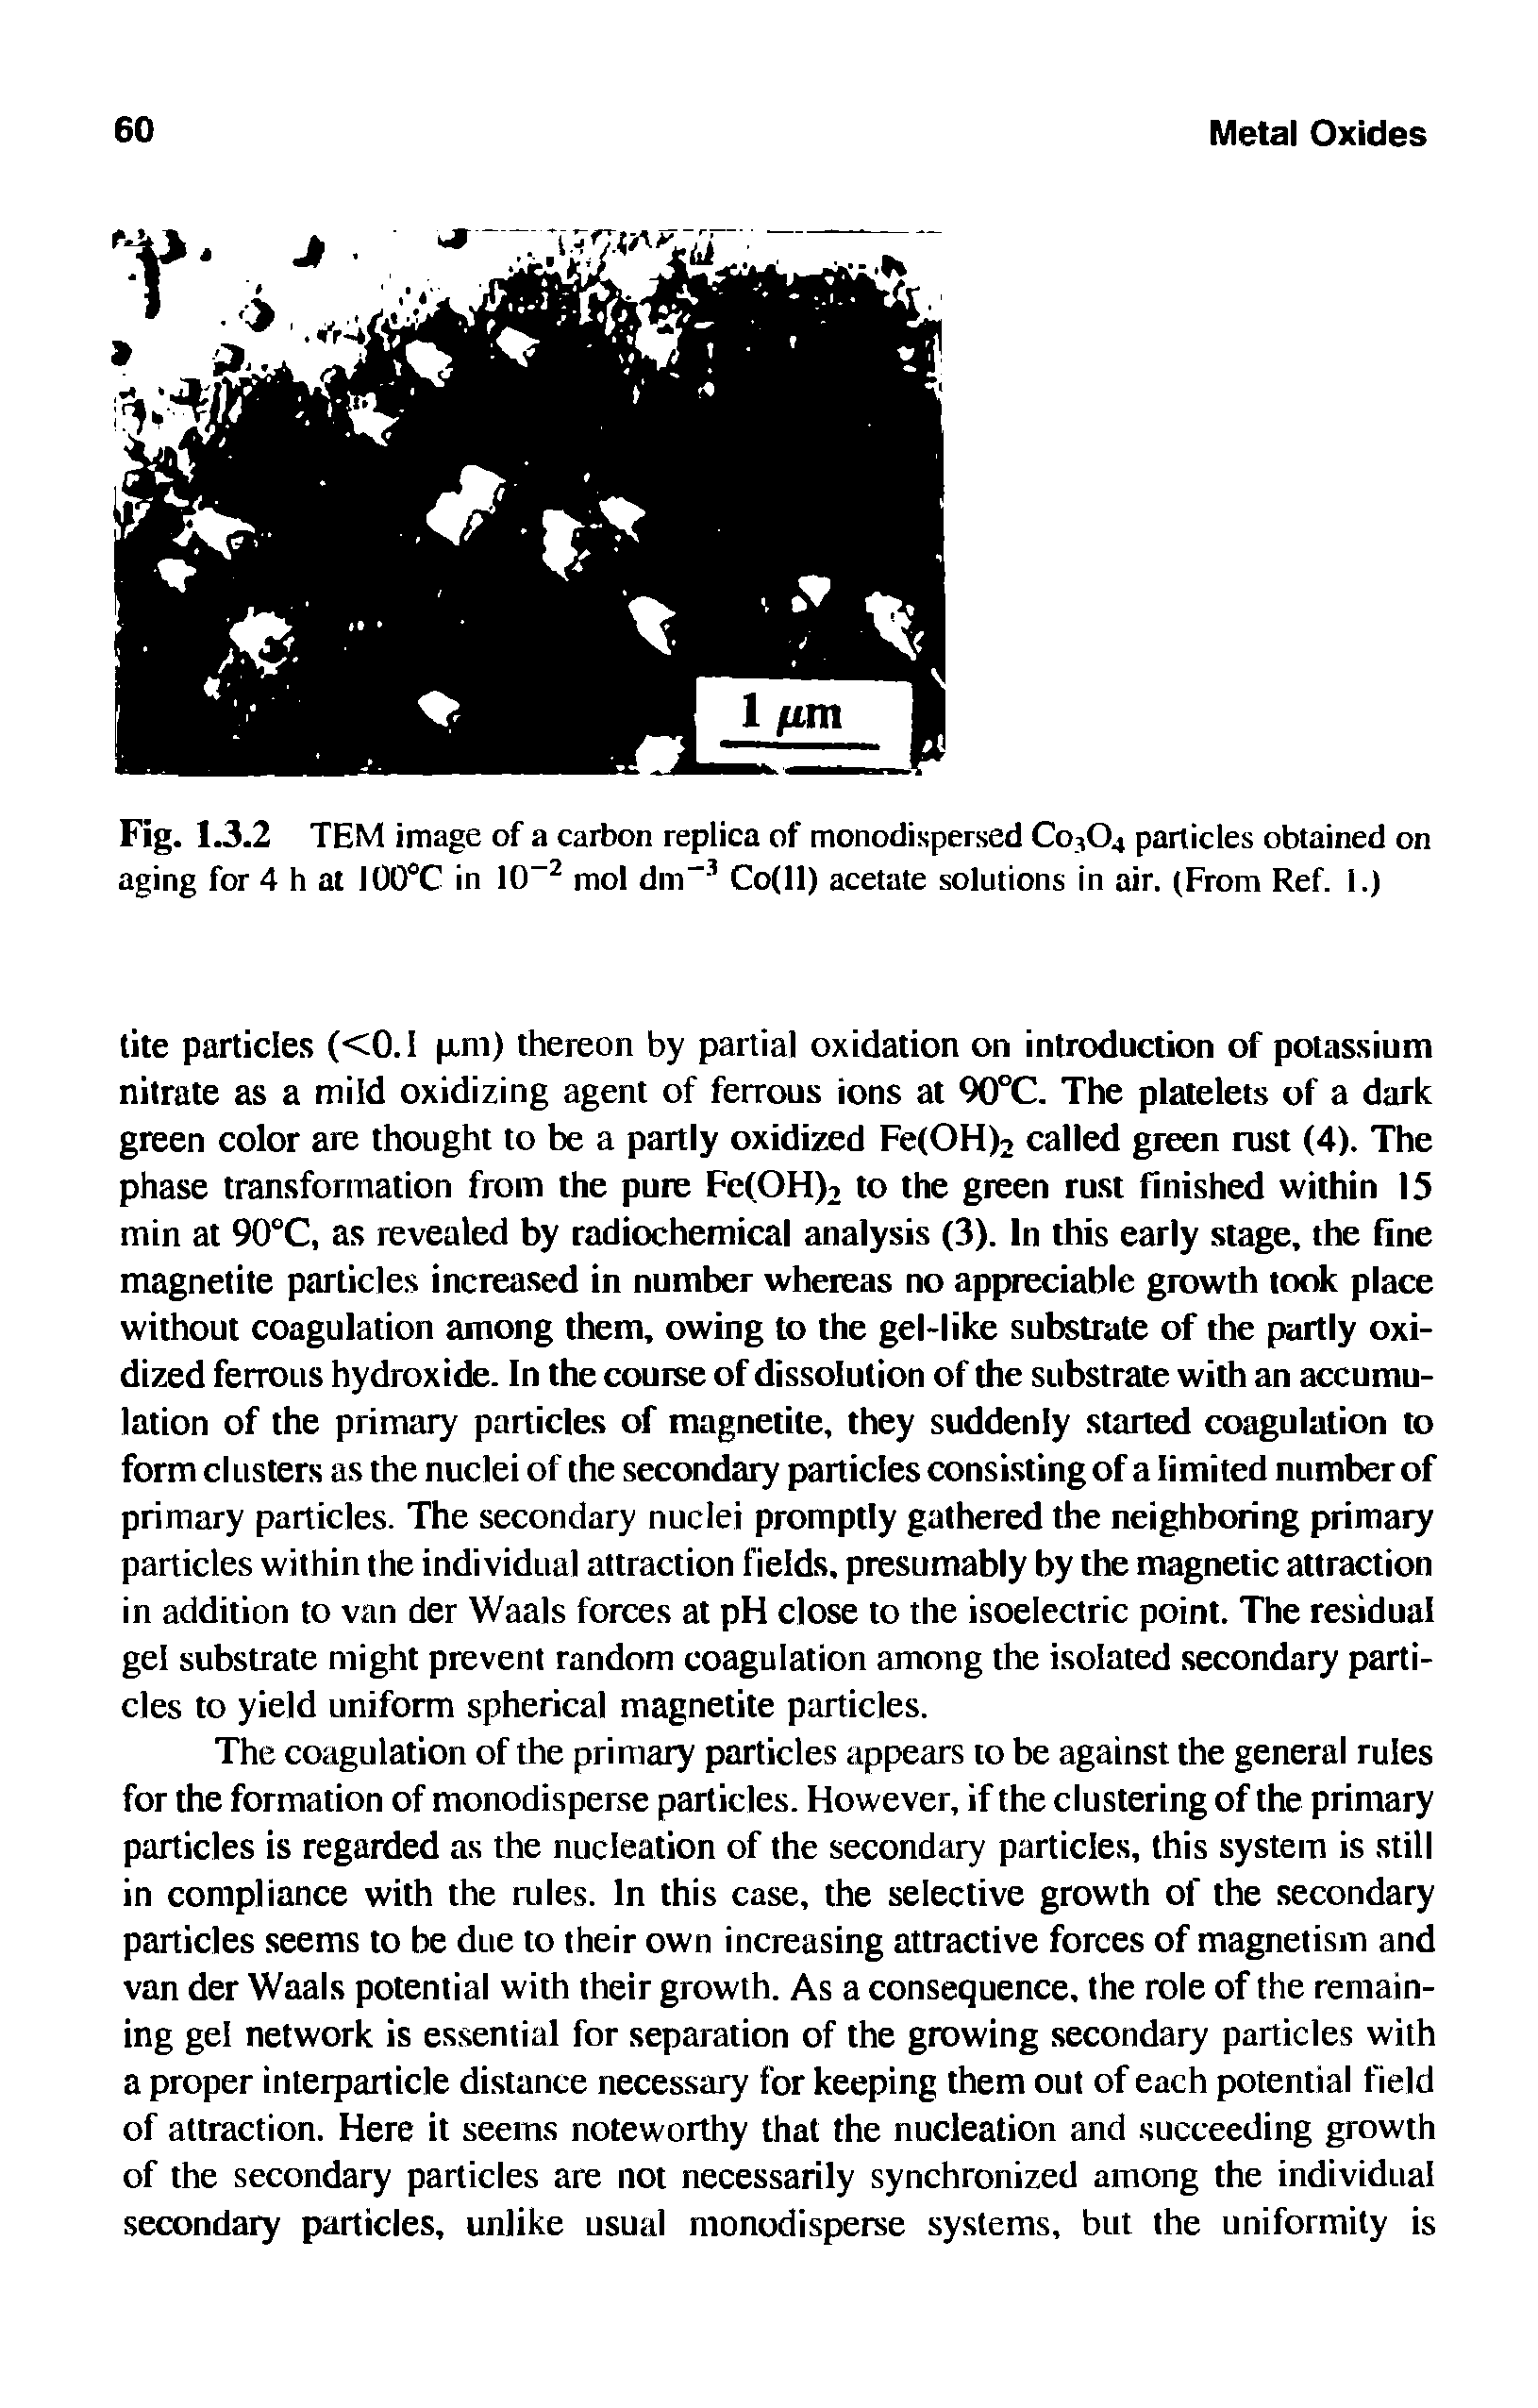 Fig. 1.3.2 TEM image of a carbon replica of monodispersed Co304 particles obtained on aging for 4 h at I00°C in 10-2 mol dm-3 Co(ll) acetate solutions in air. (From Ref. 1.)...